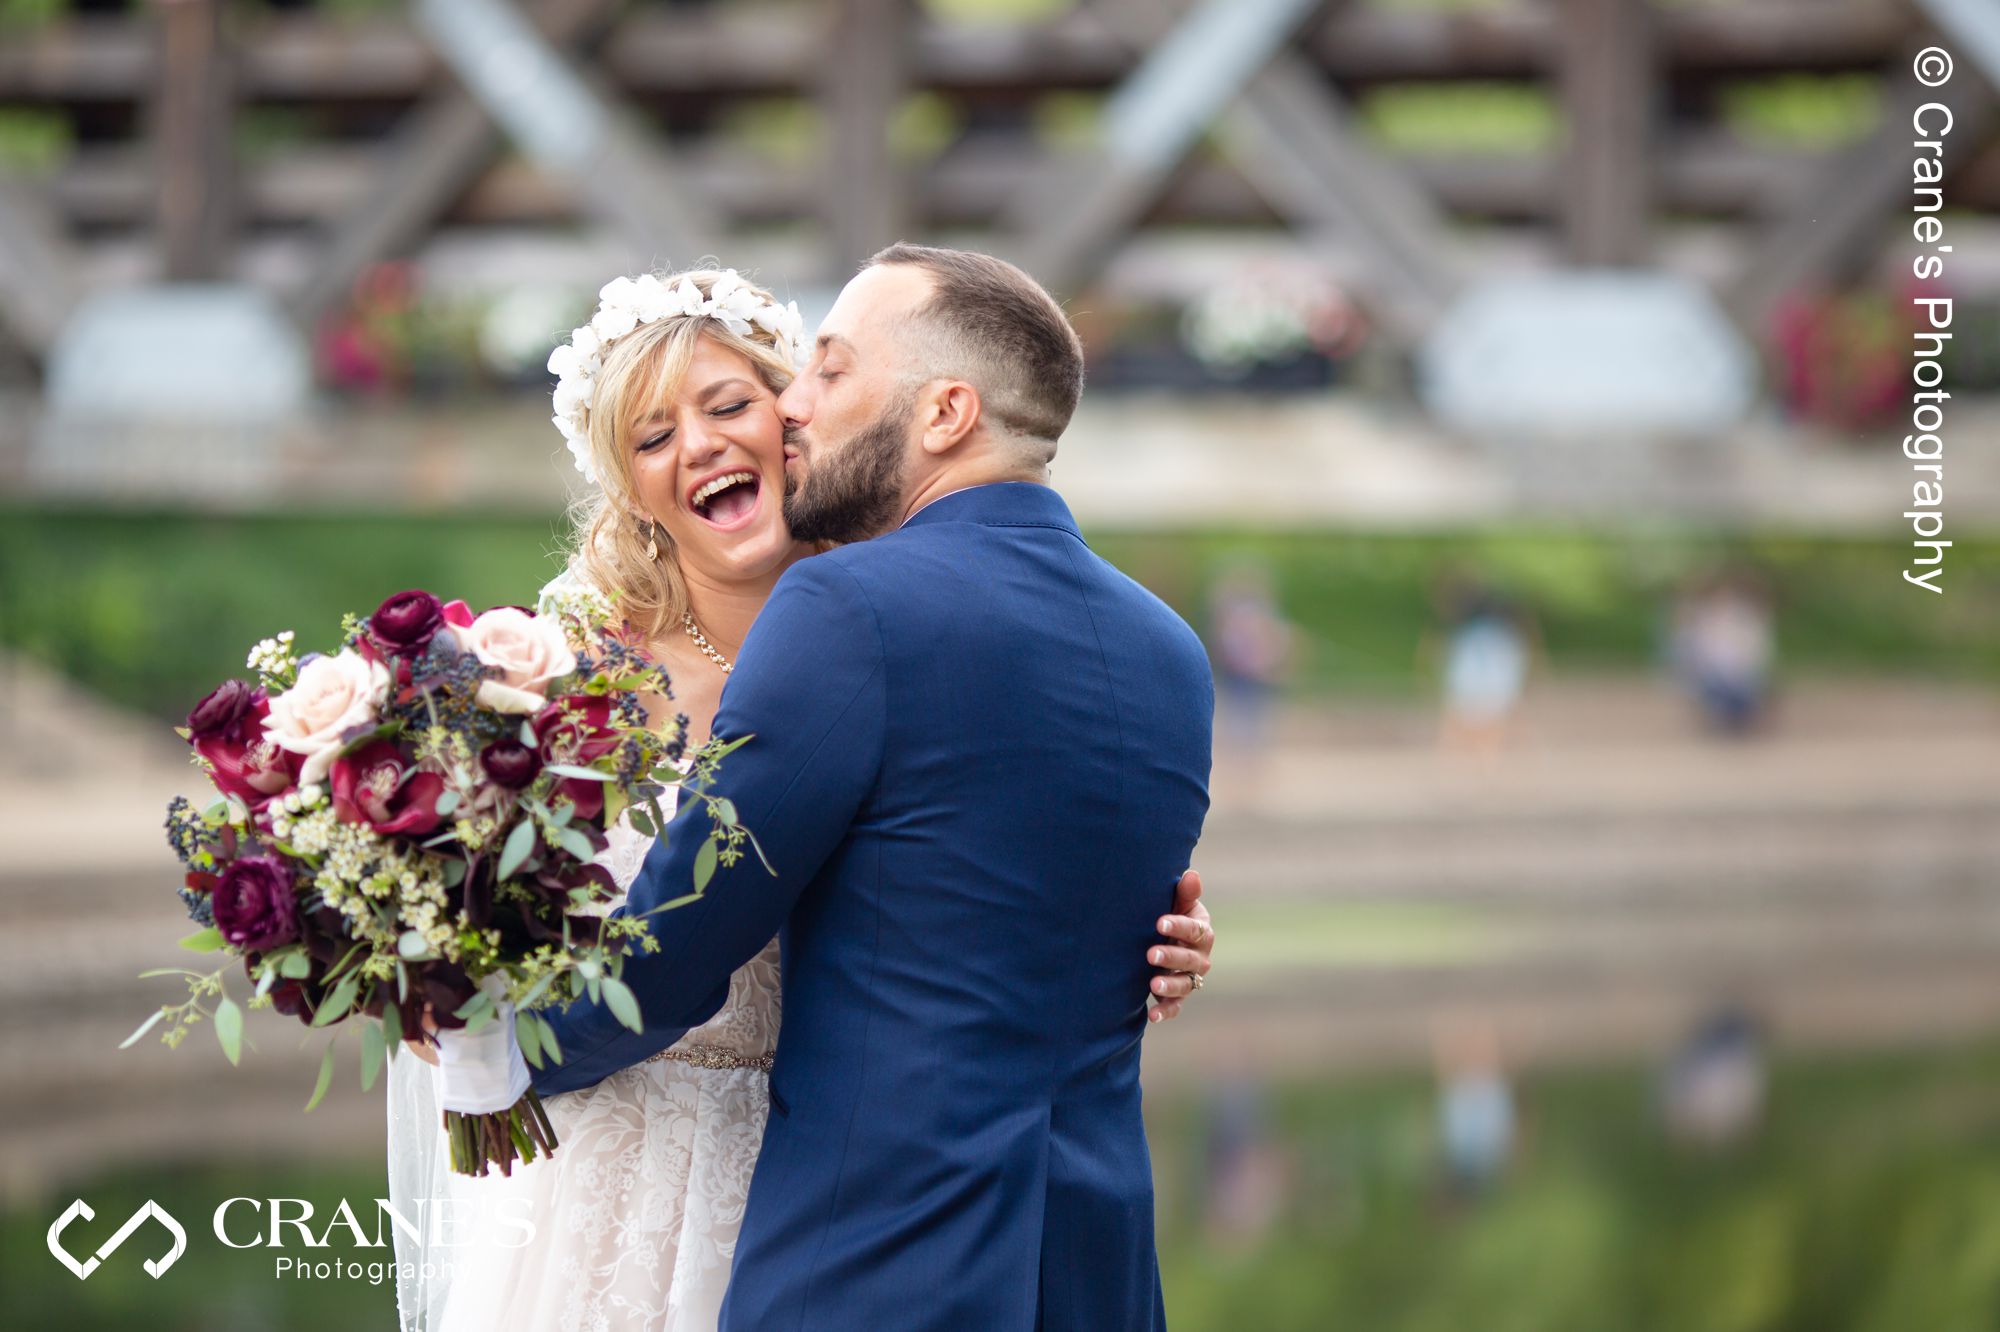 A candid wedding portrait taken by the river outside the Elements at Water Street in Naperville